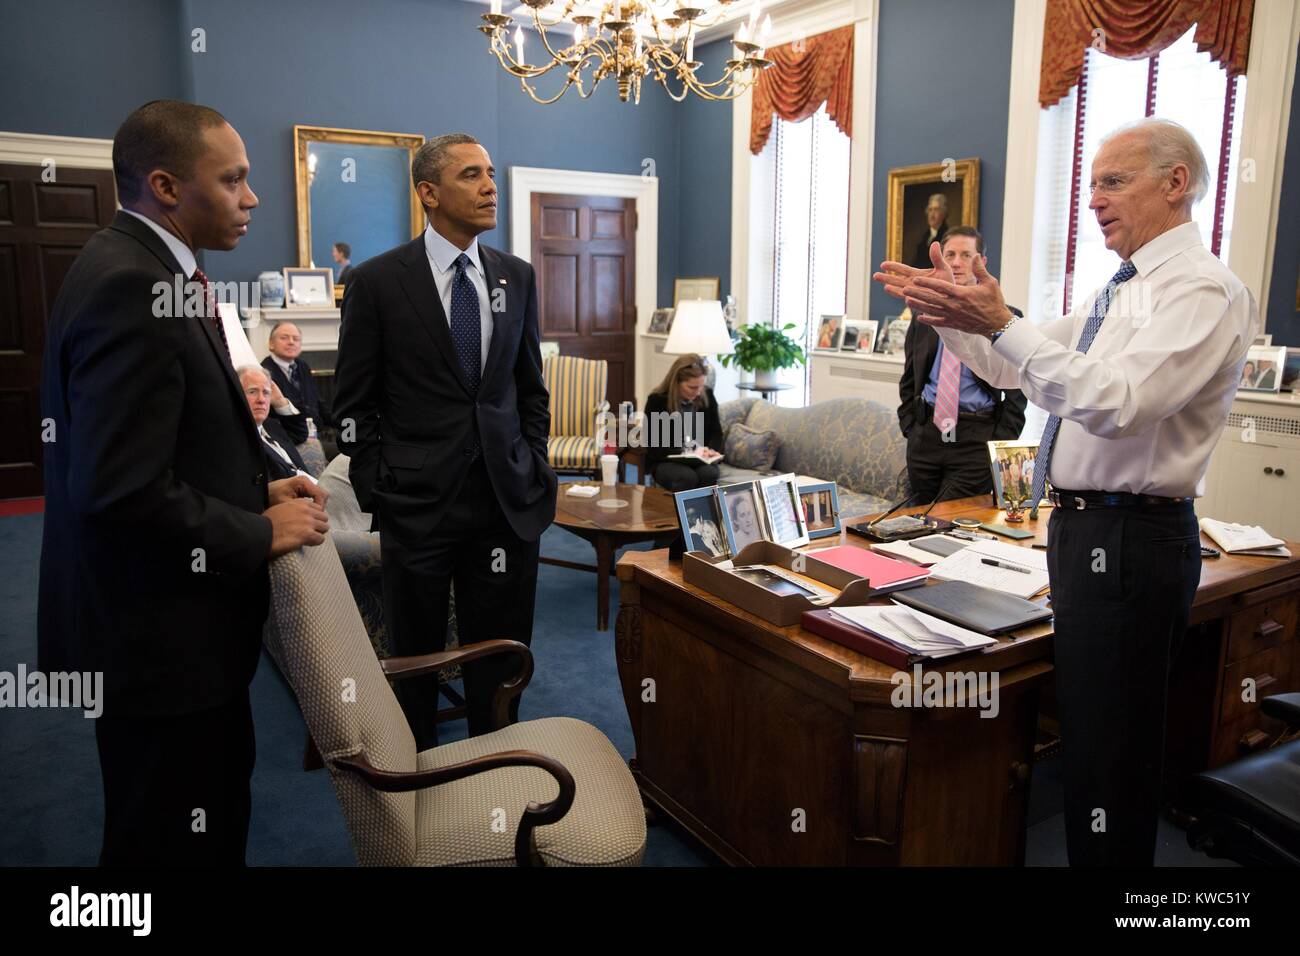 VP Joe Biden meeting with President Obama and Rob Nabors, in Biden's West Wing office. Dec. 31, 2012. (BSLOC 2015 13 239) Stock Photo